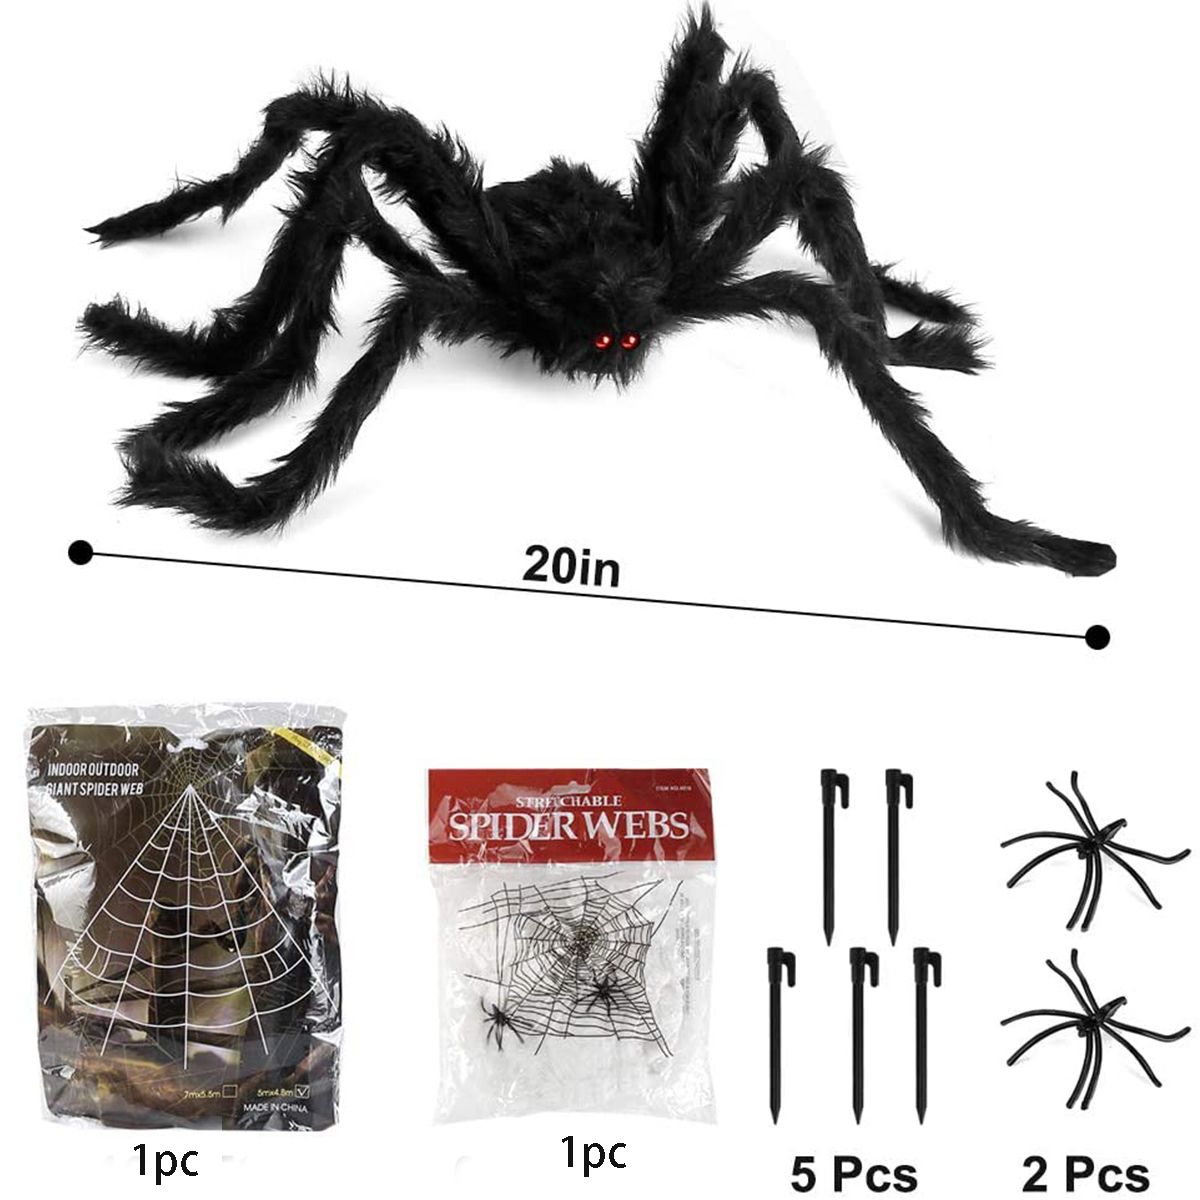 10pcs Halloween Outdoor Spider Decorations Set Triangular Giant Spider Webs With Large Fake Hairy Spider 20 And 2 Small Spiders Prop Decorations Part